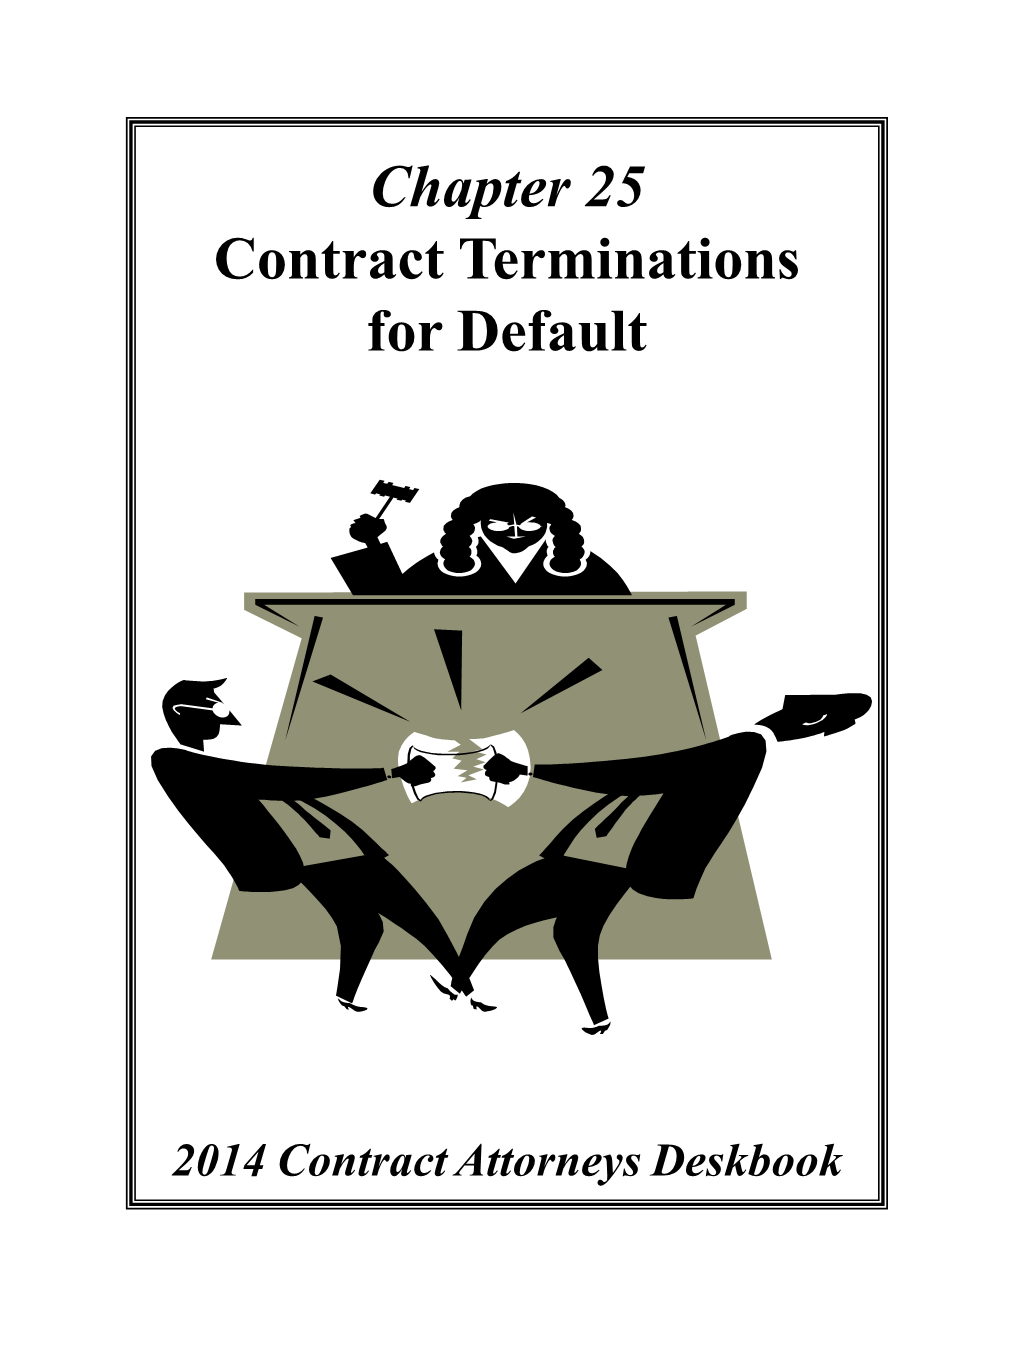 Chapter 25 Contract Terminations for Default